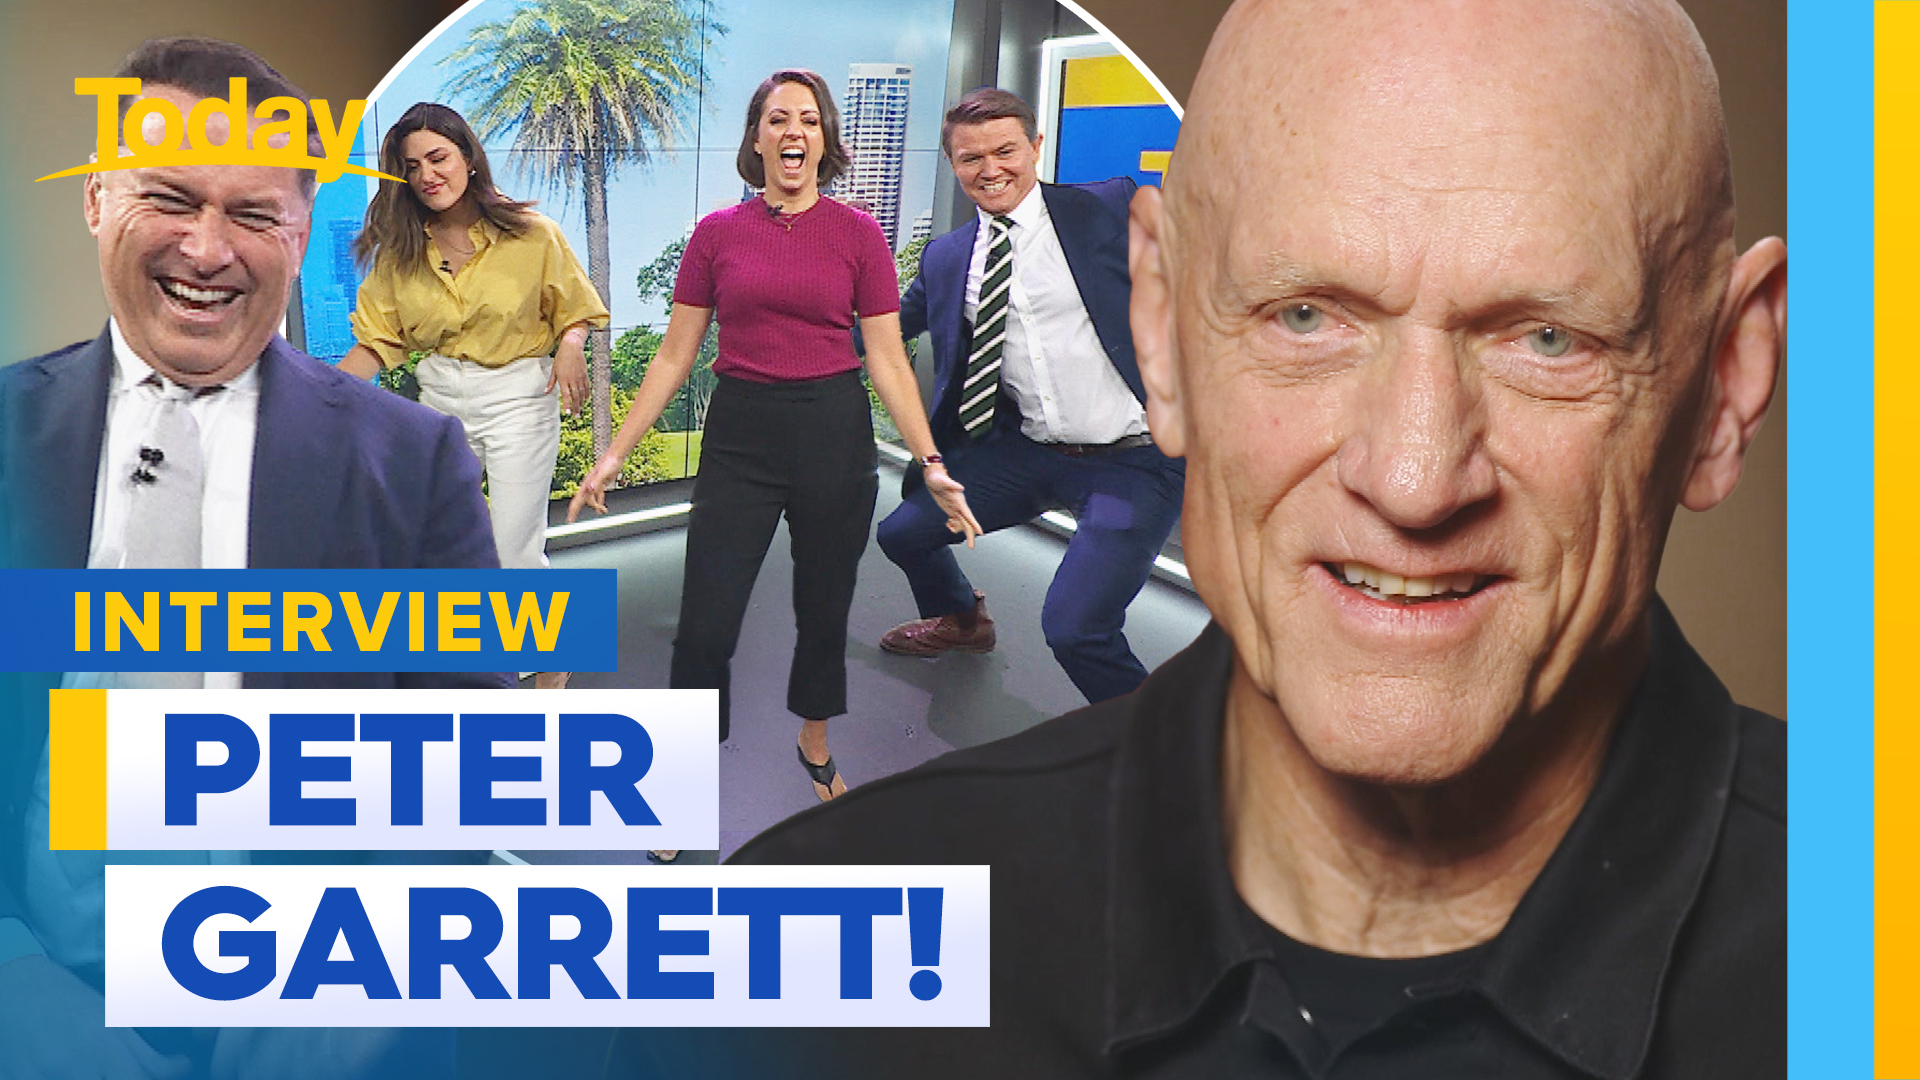 Peter Garrett catches up with Today